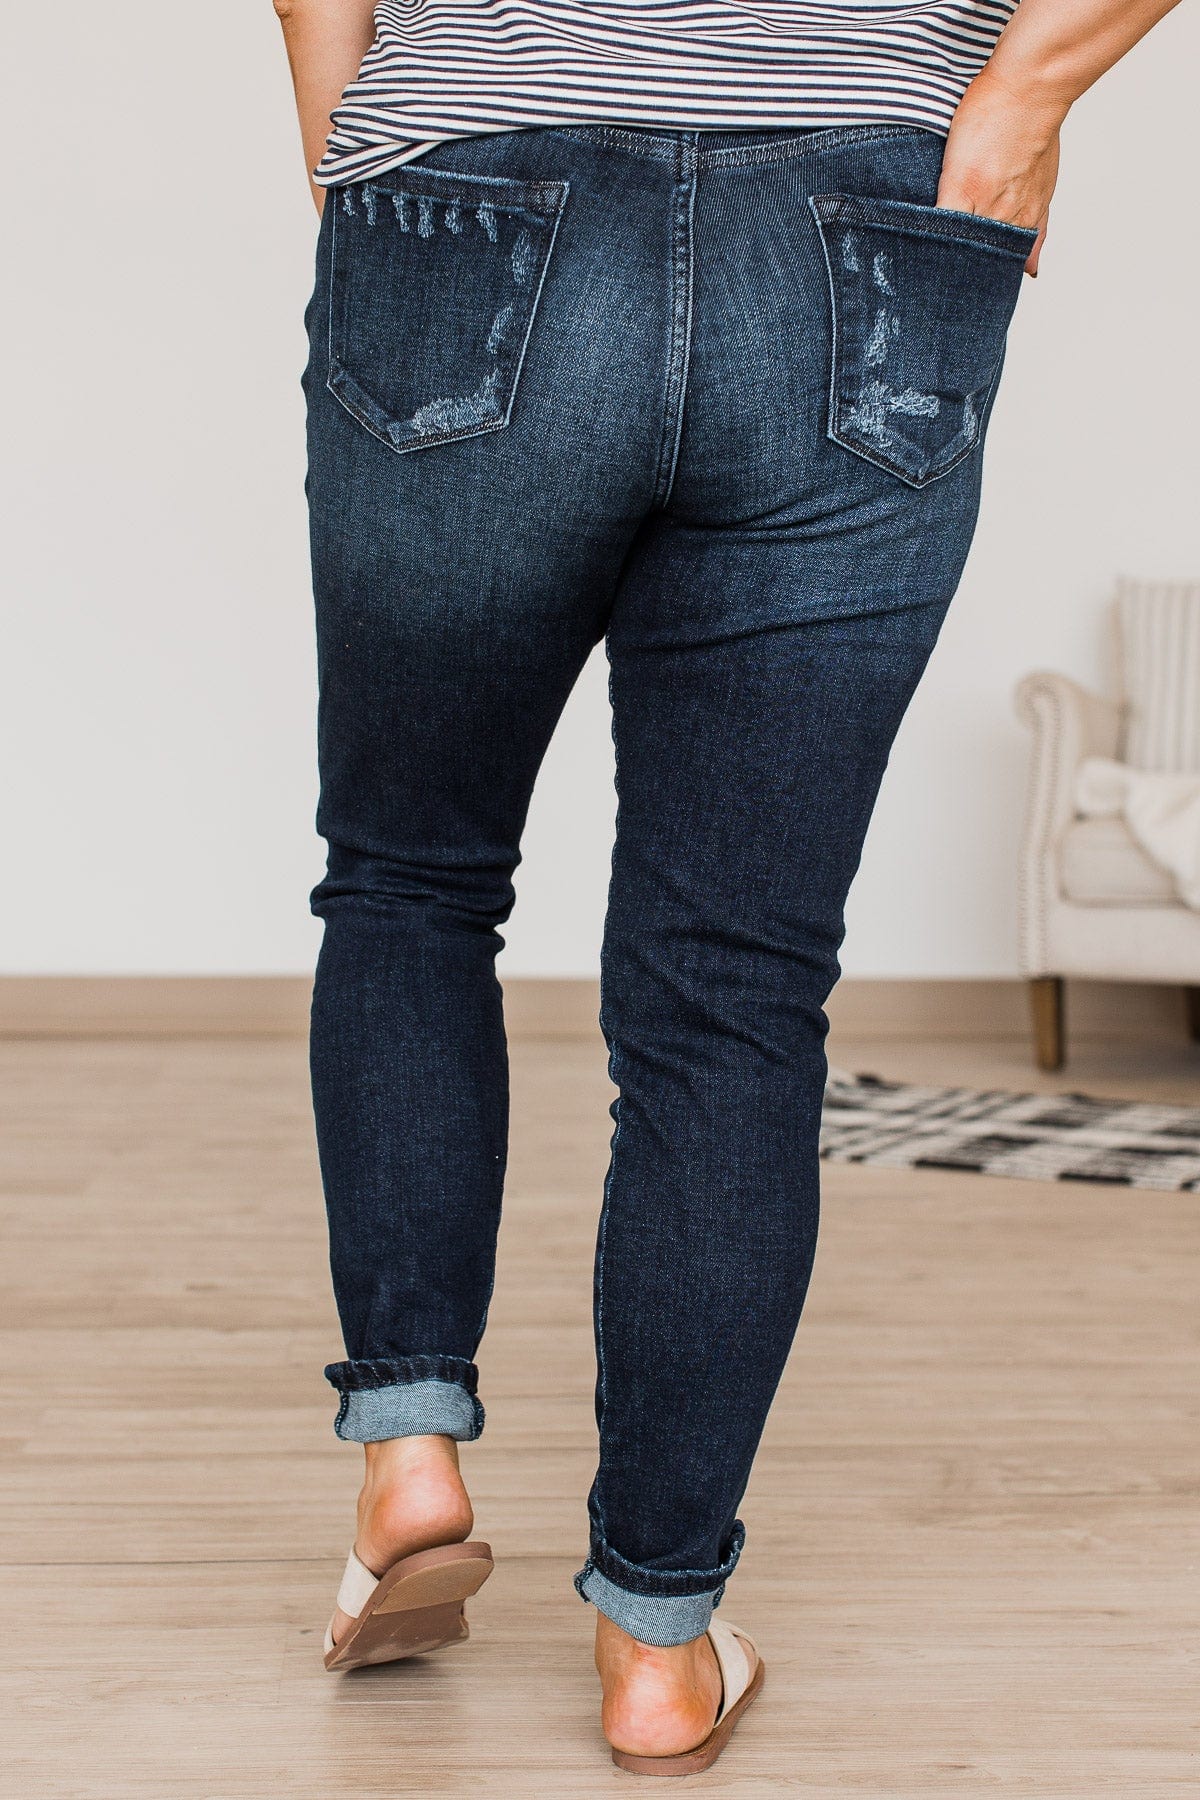 KanCan High-Rise Skinny Jeans- Nellie Wash